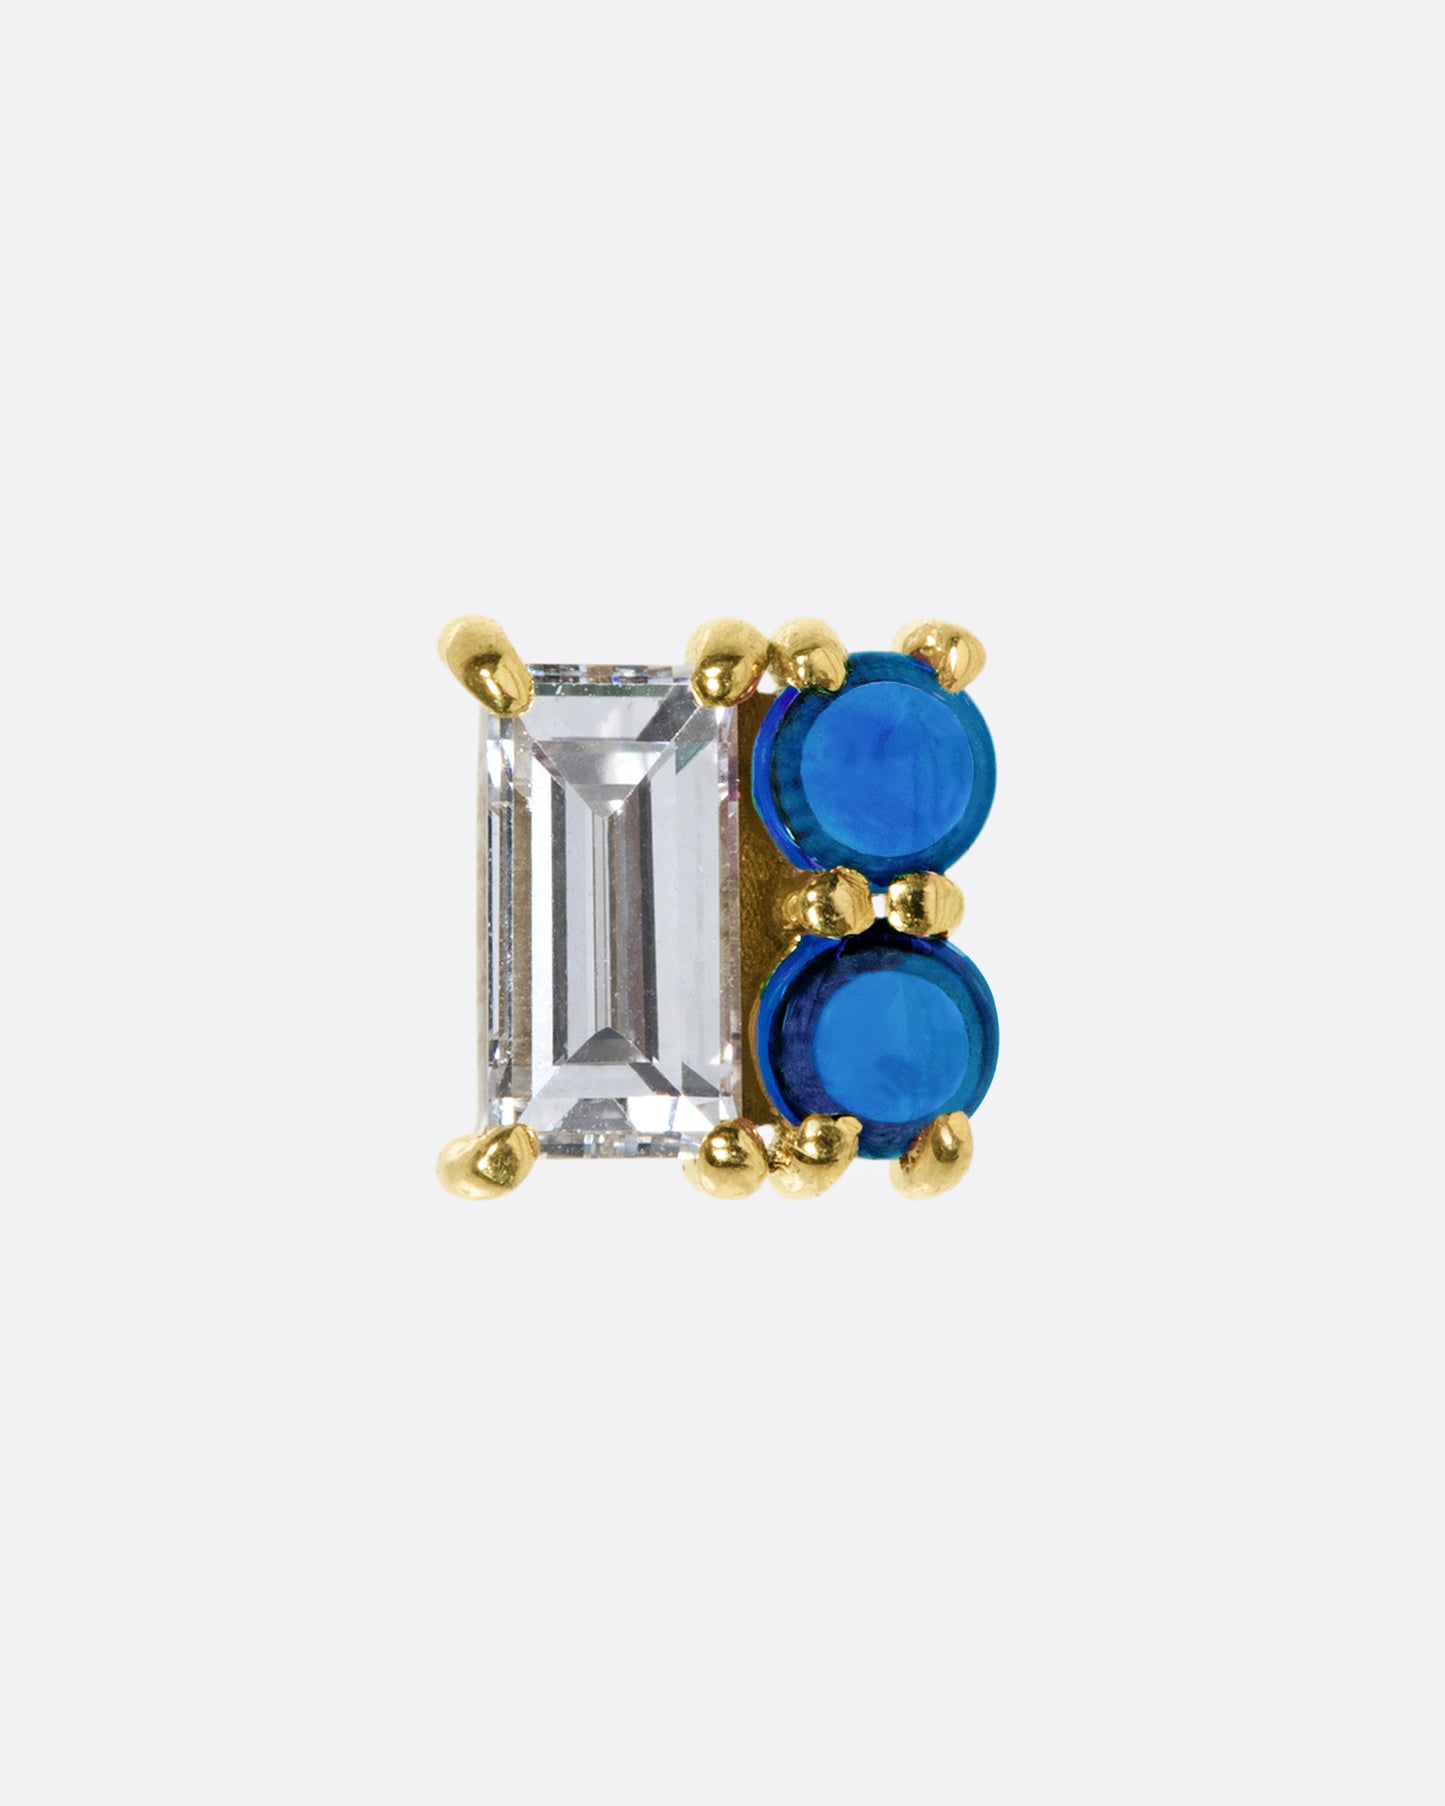 Two deep blue sapphire cabochons form half of this square earring; a baguette diamond the other half.